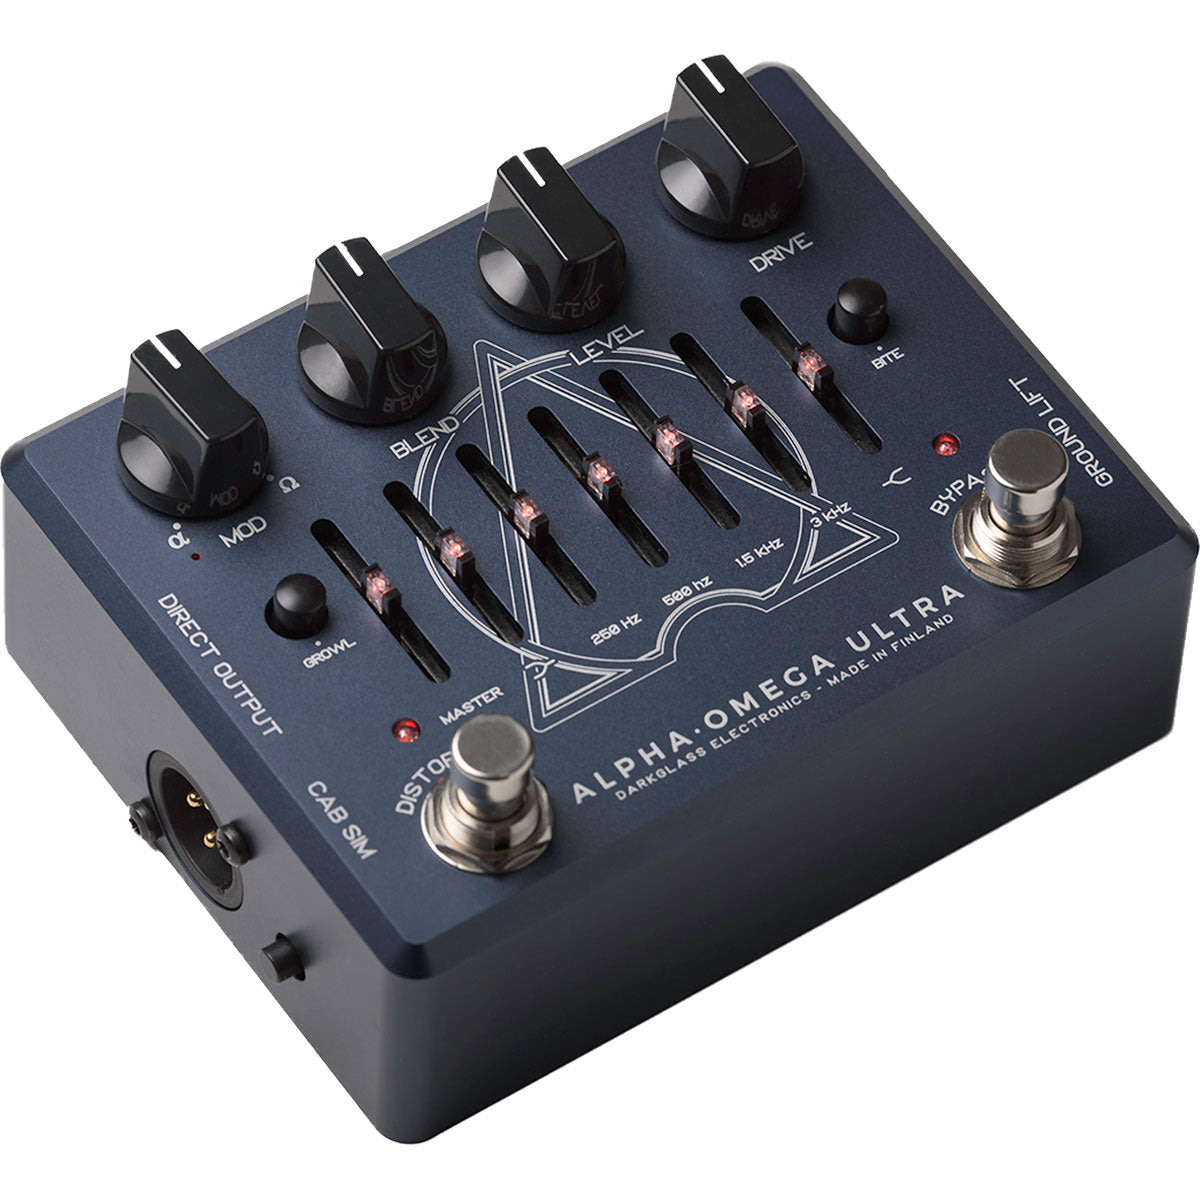 3/4 view of Darkglass Alpha Omega Ultra v2 (Aux-In) Bass Preamp Pedal showing top, front and left side